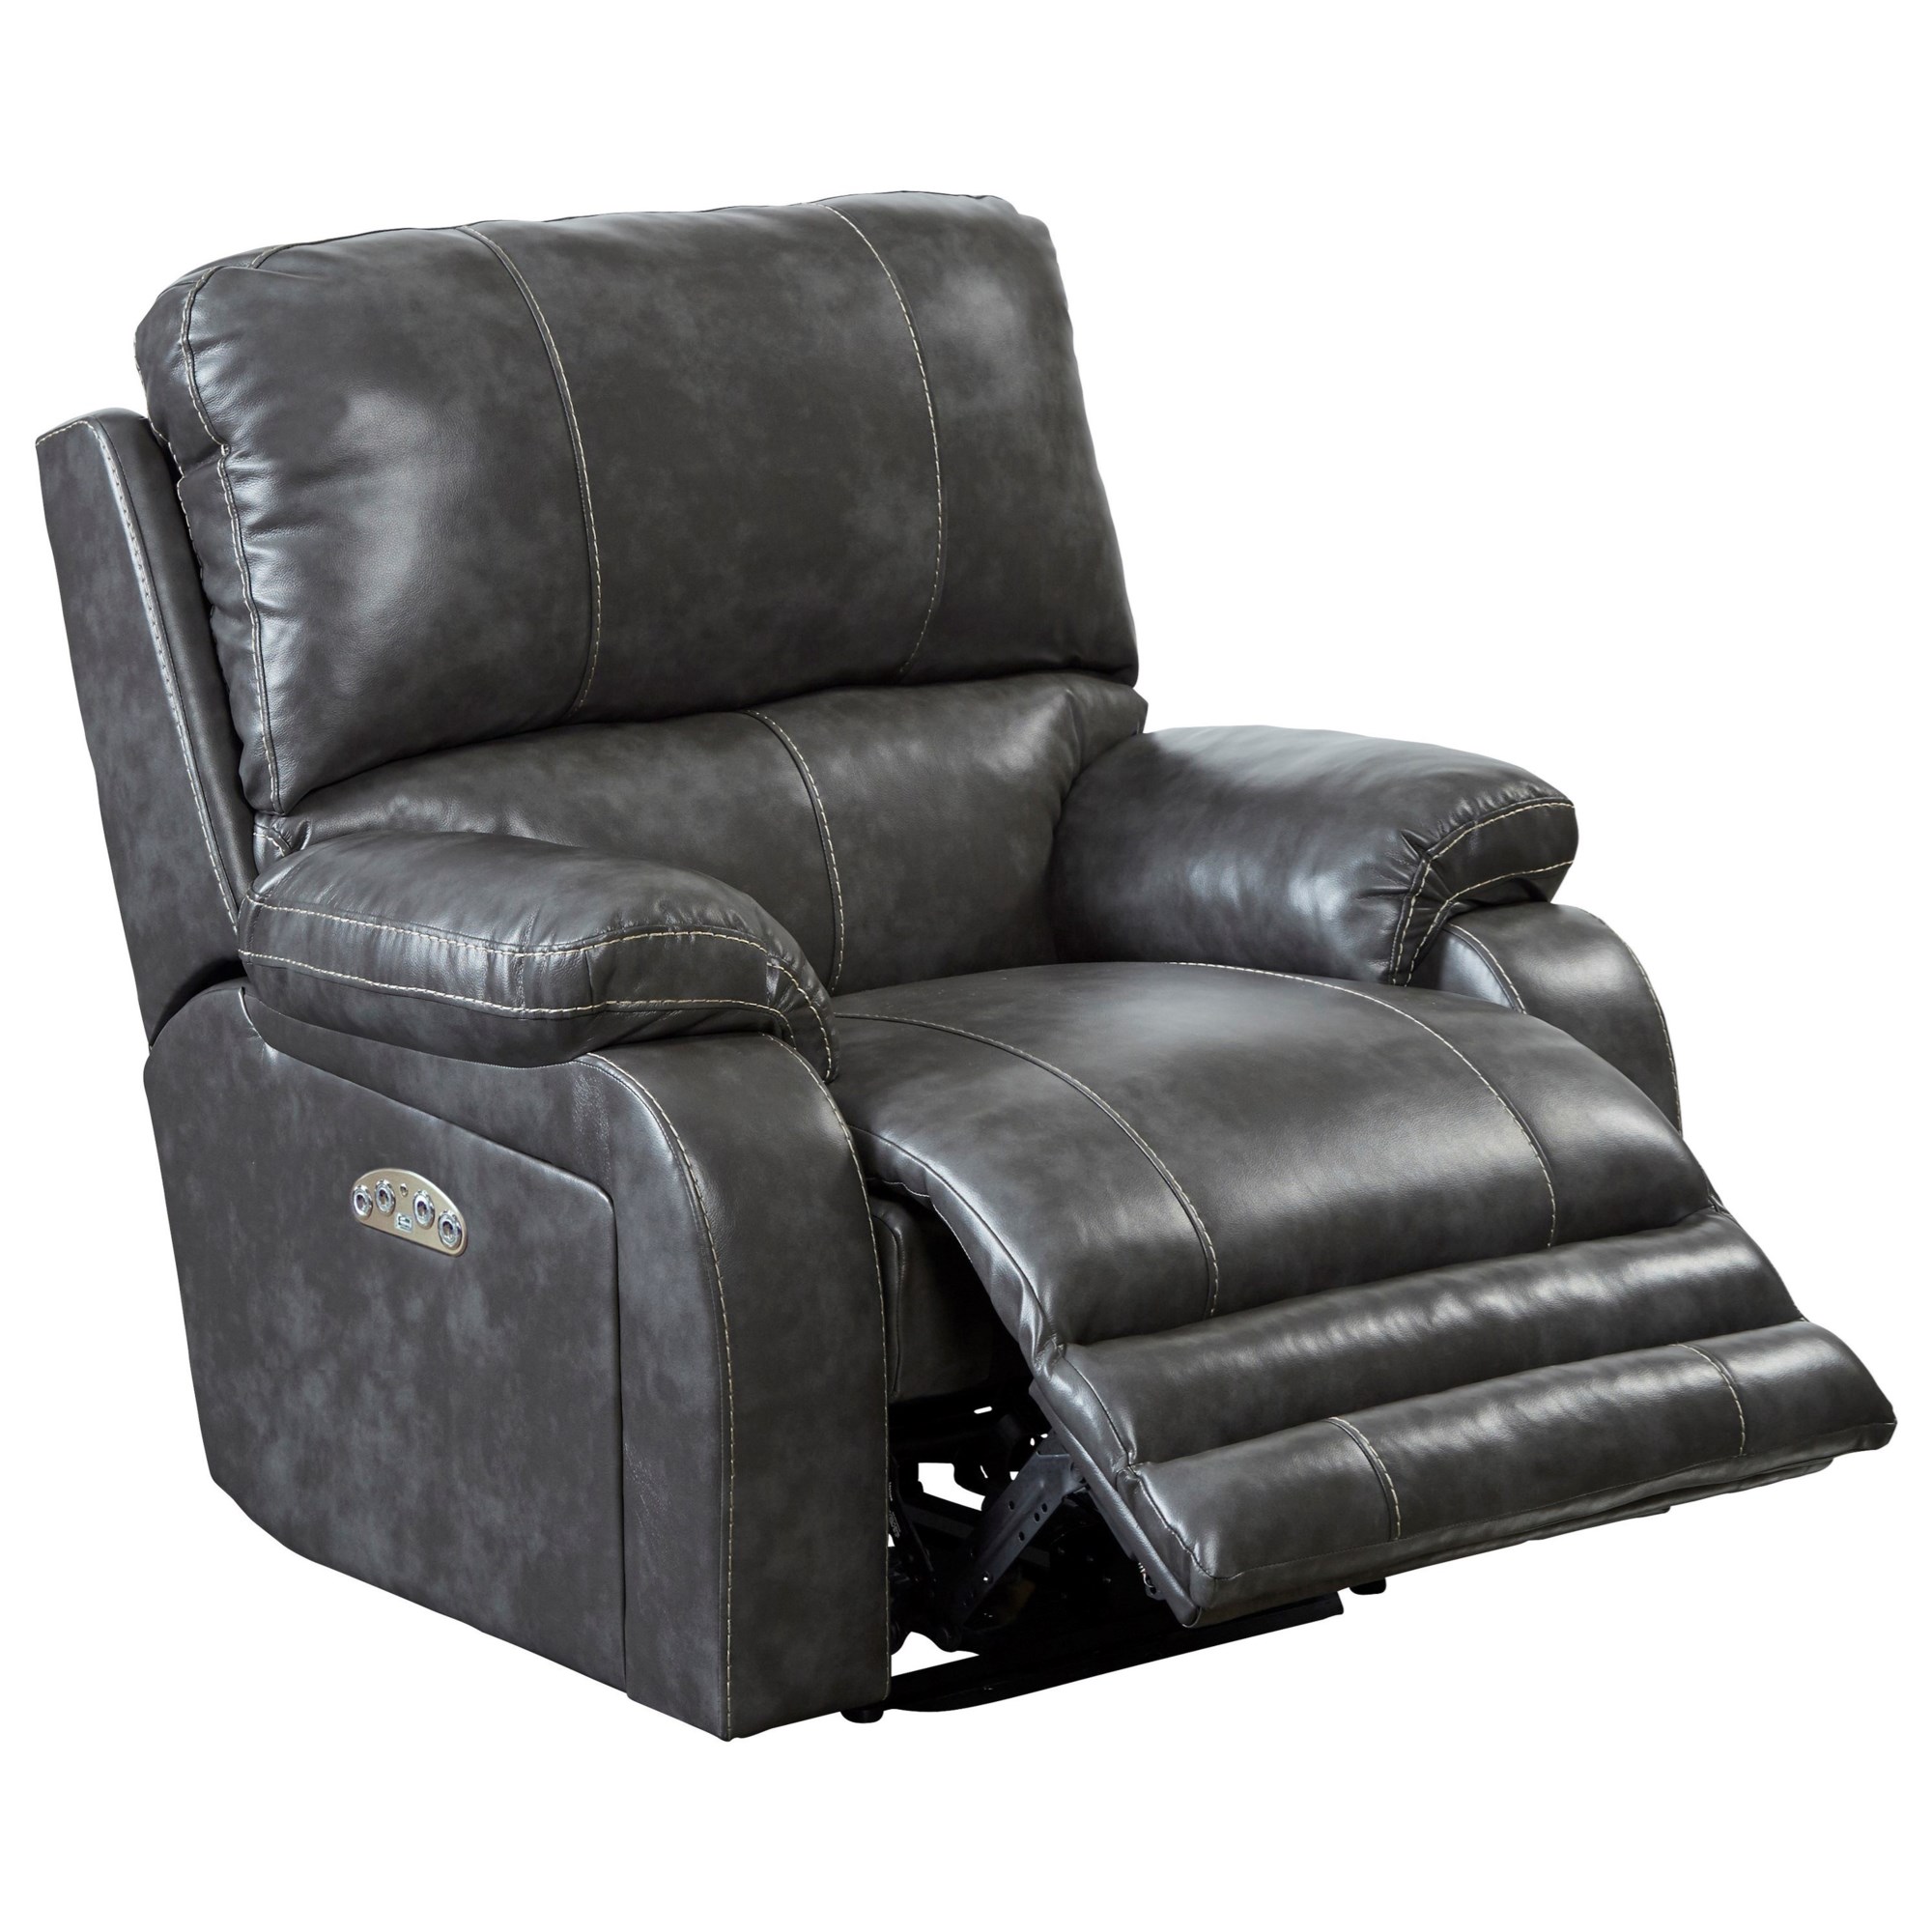 Catnapper 4762 Thornton 764762-7-1152-78-1252-78 Power Lay Flat Recliner  with Power Lumbar Support and Power Headrest, Value City Furniture